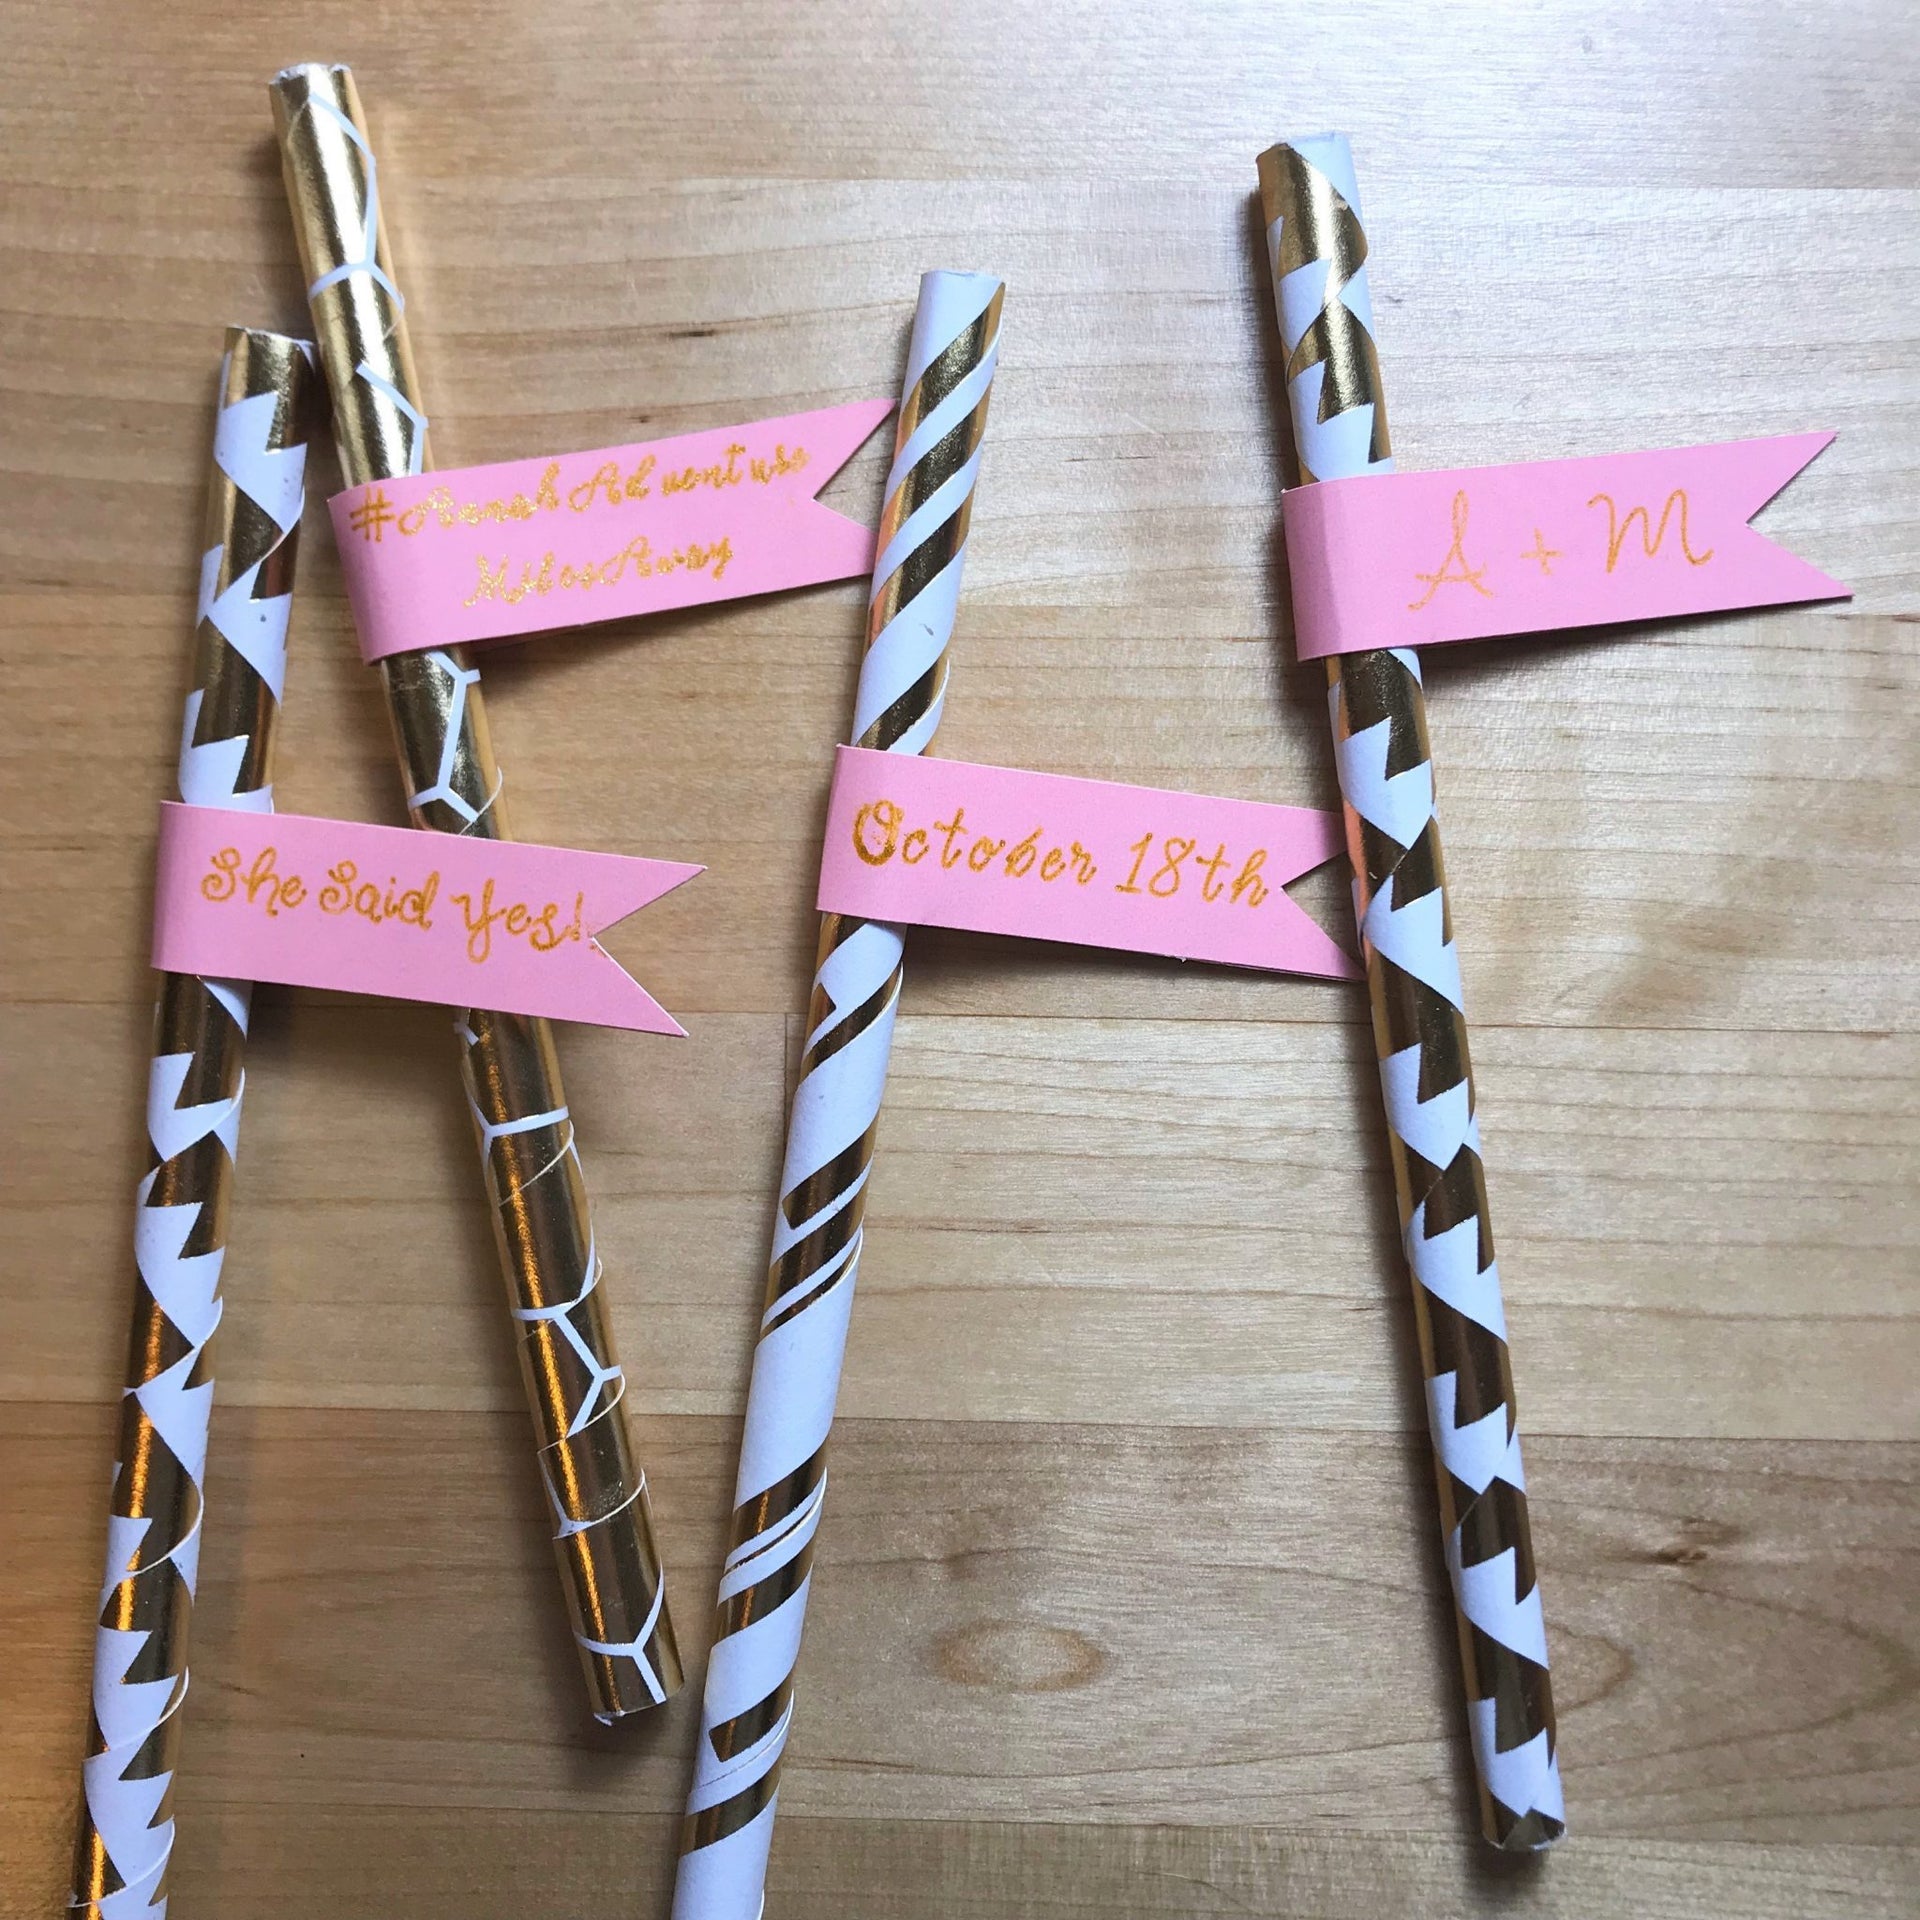 18 Crafty Ways to Decorate With Paper Straws  Paper straws crafts, Straw  crafts, Paper crafts